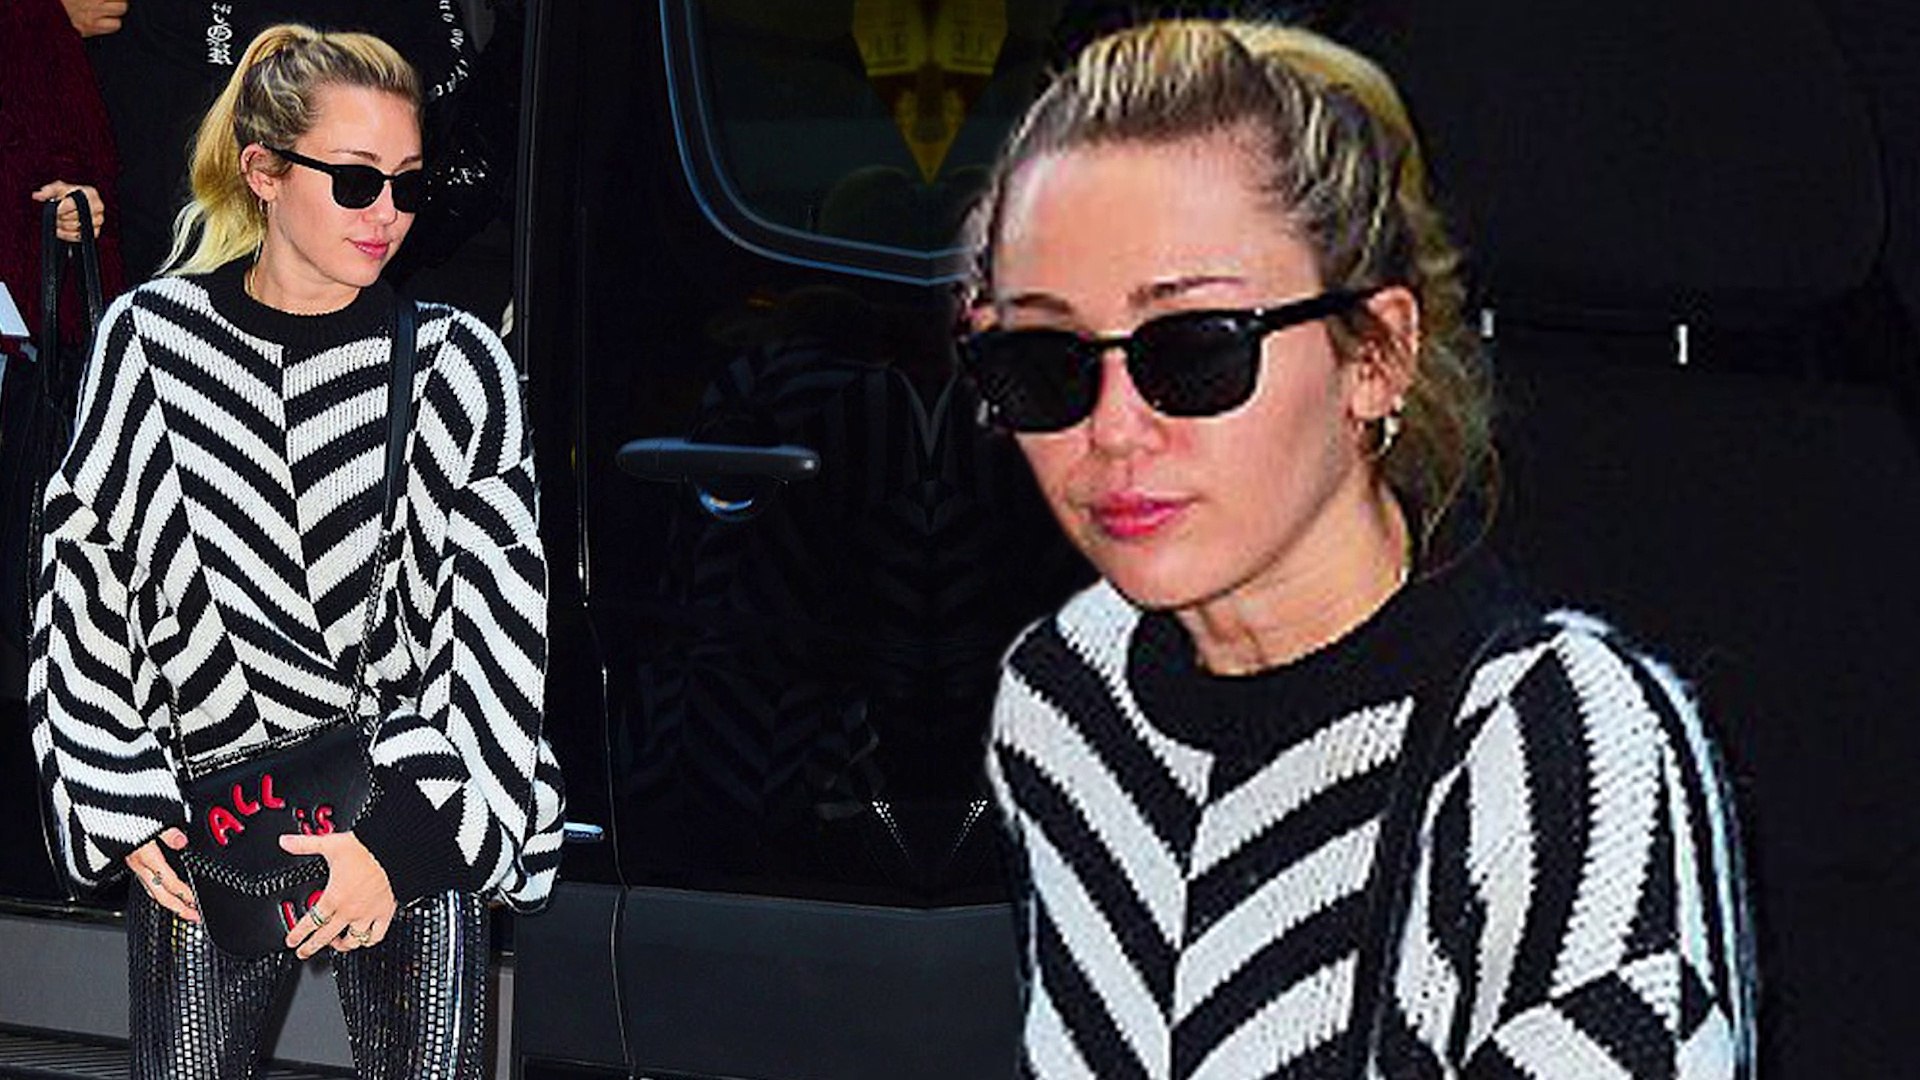 Rock star chic! Miley Cyrus cuts a stylish figure in black and white sweater with tight metallic leg